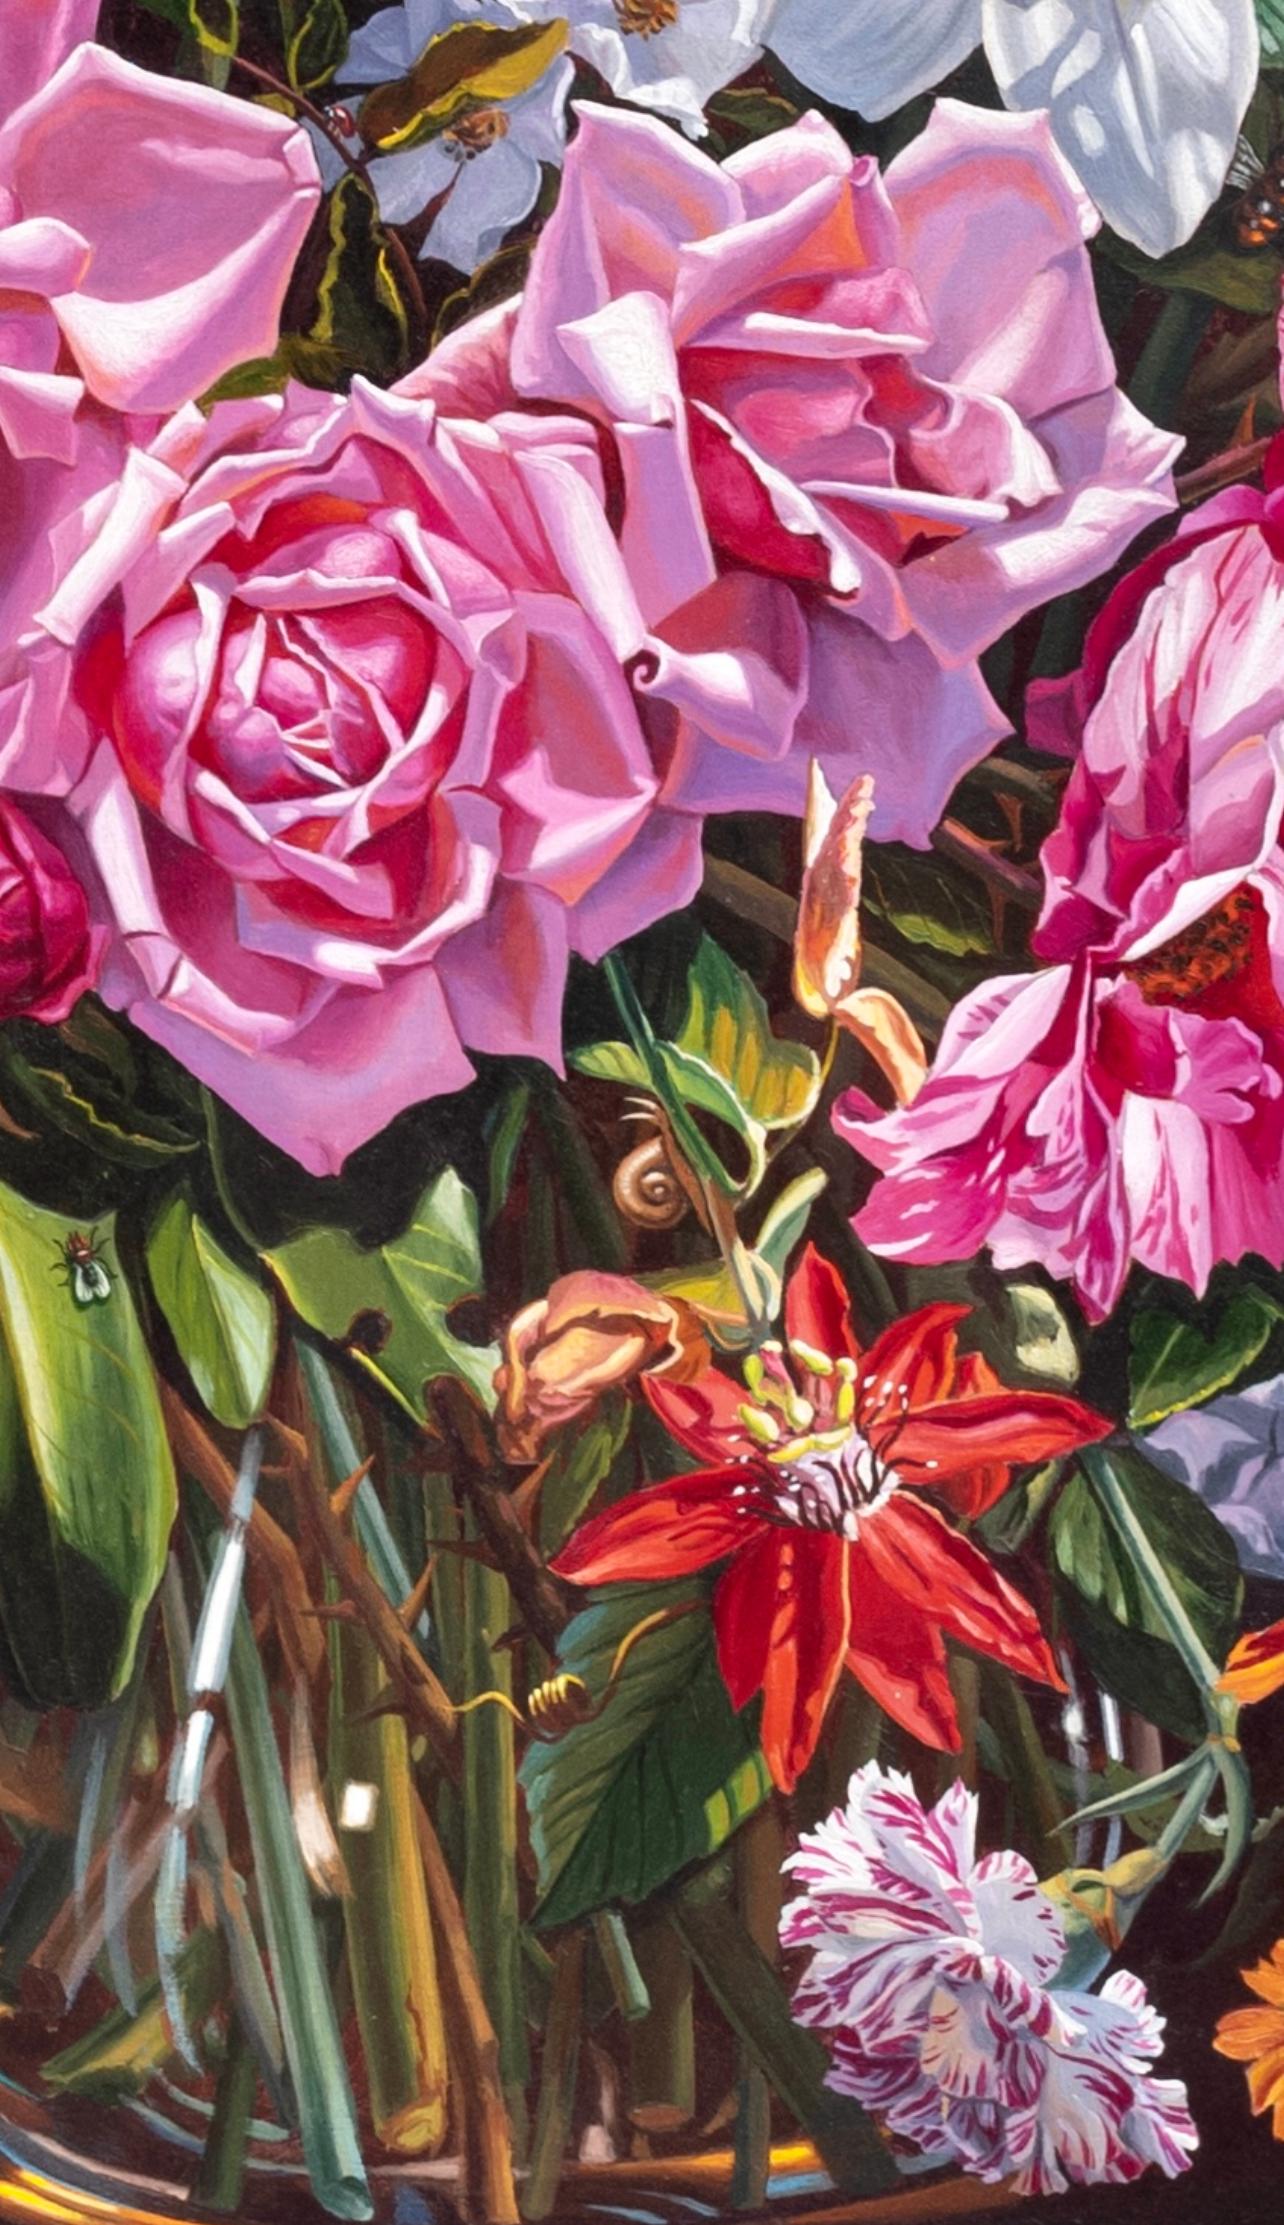 “Flower Piece with Storm, ” Photorealism & Hyperrealism - Photorealist Painting by Ian Hornak